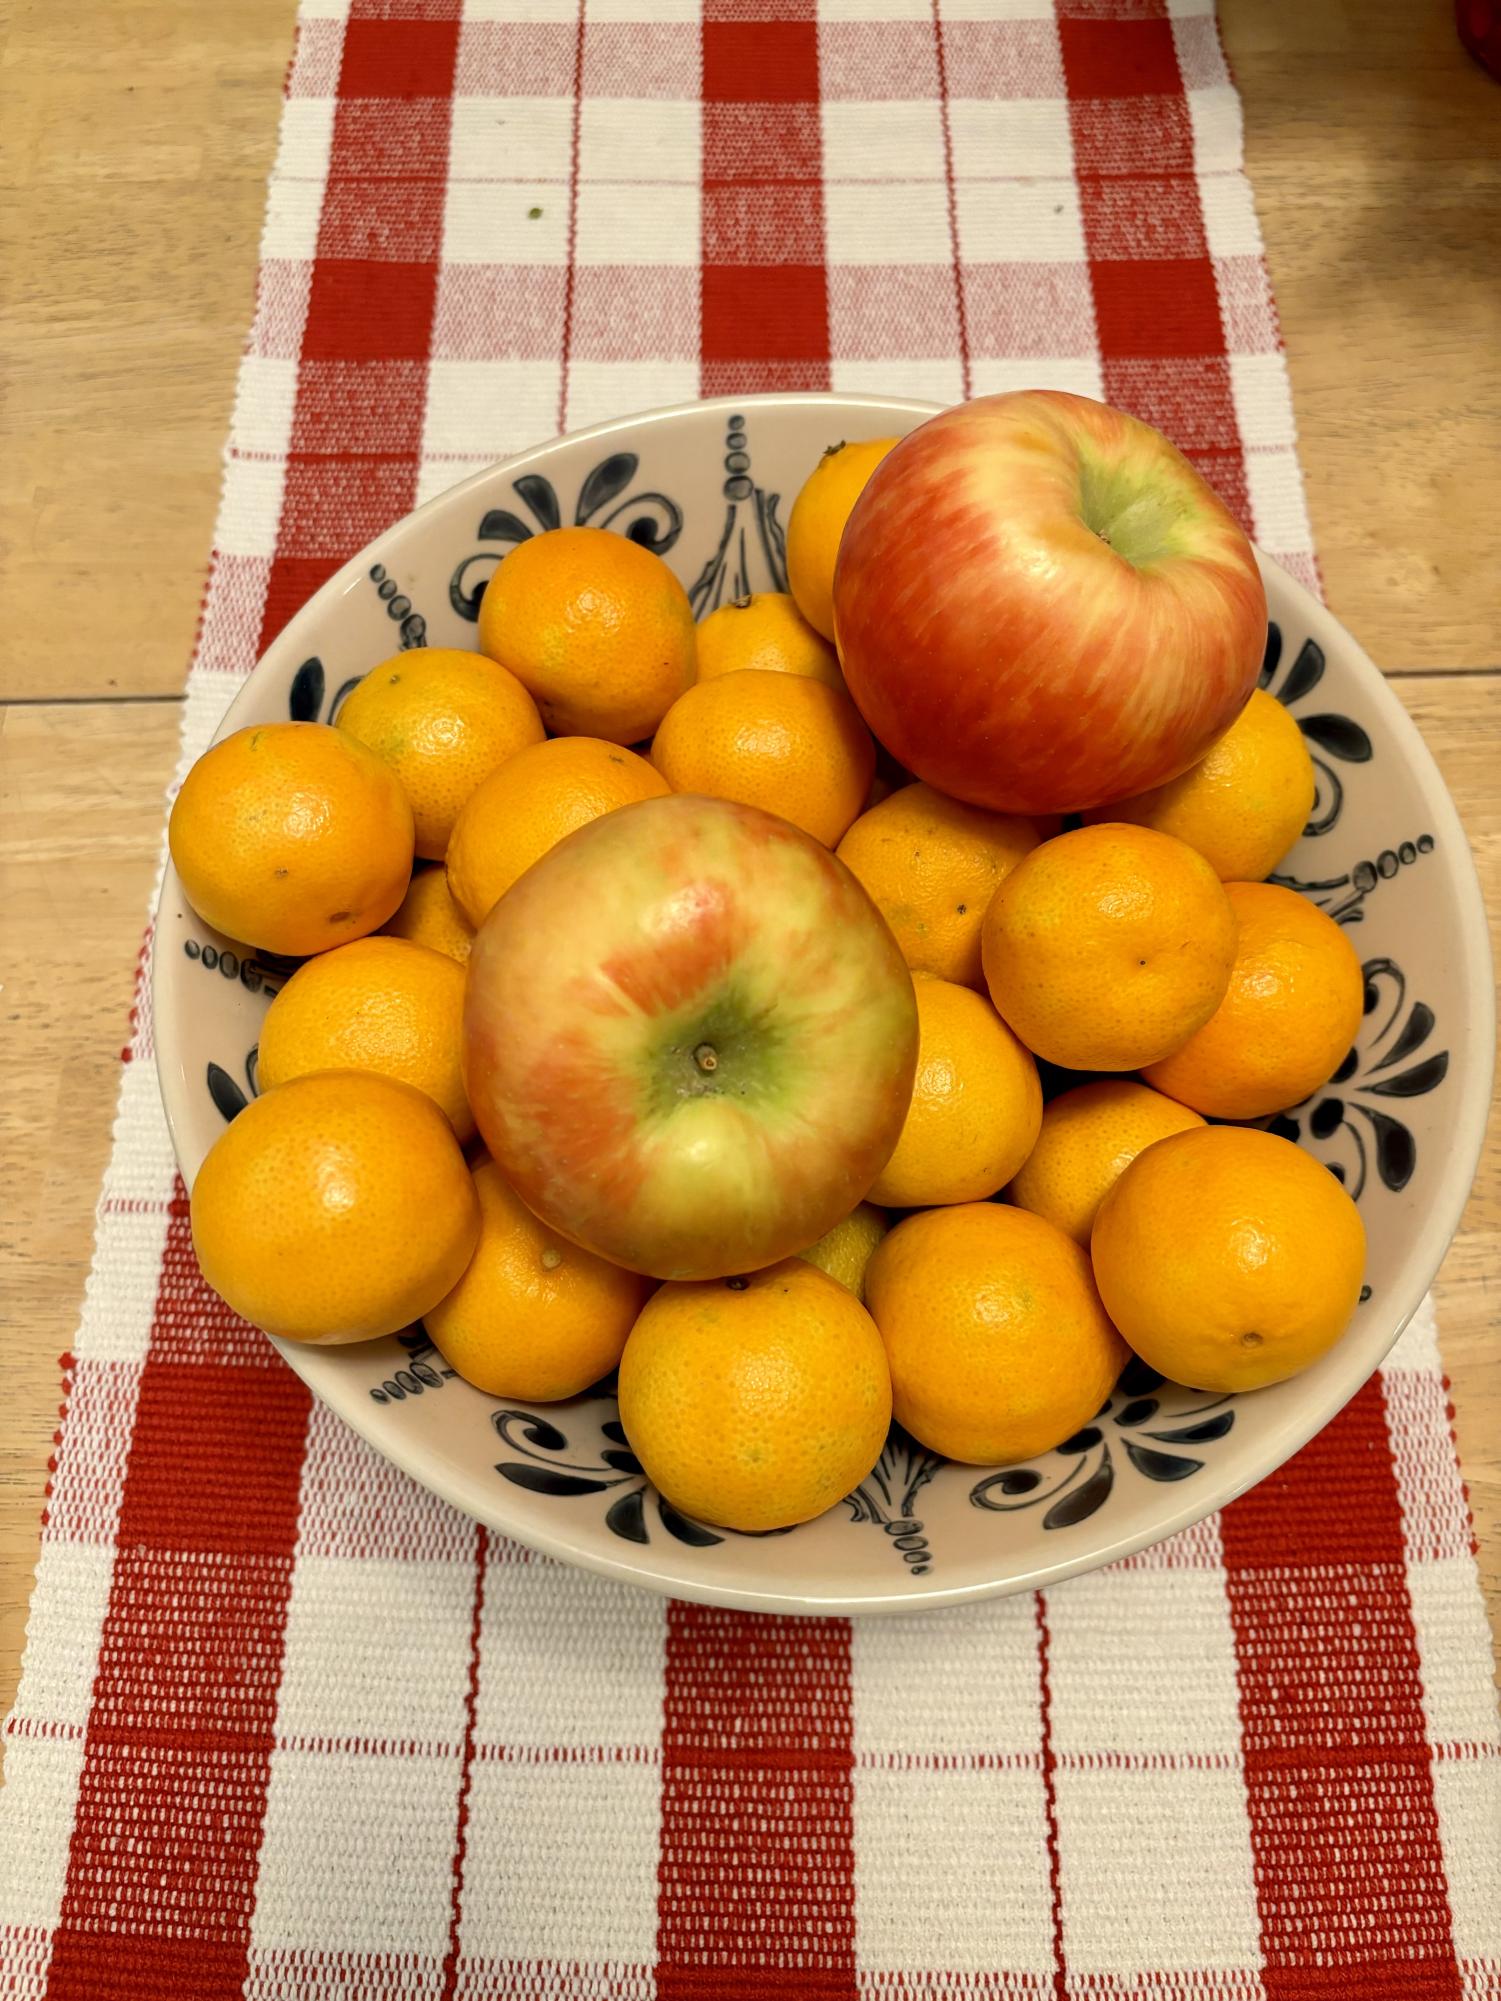 A collection of oranges and apples sit in a fruit bowl, demonstrating the often used cliche “you can’t compare oranges to apples.” 